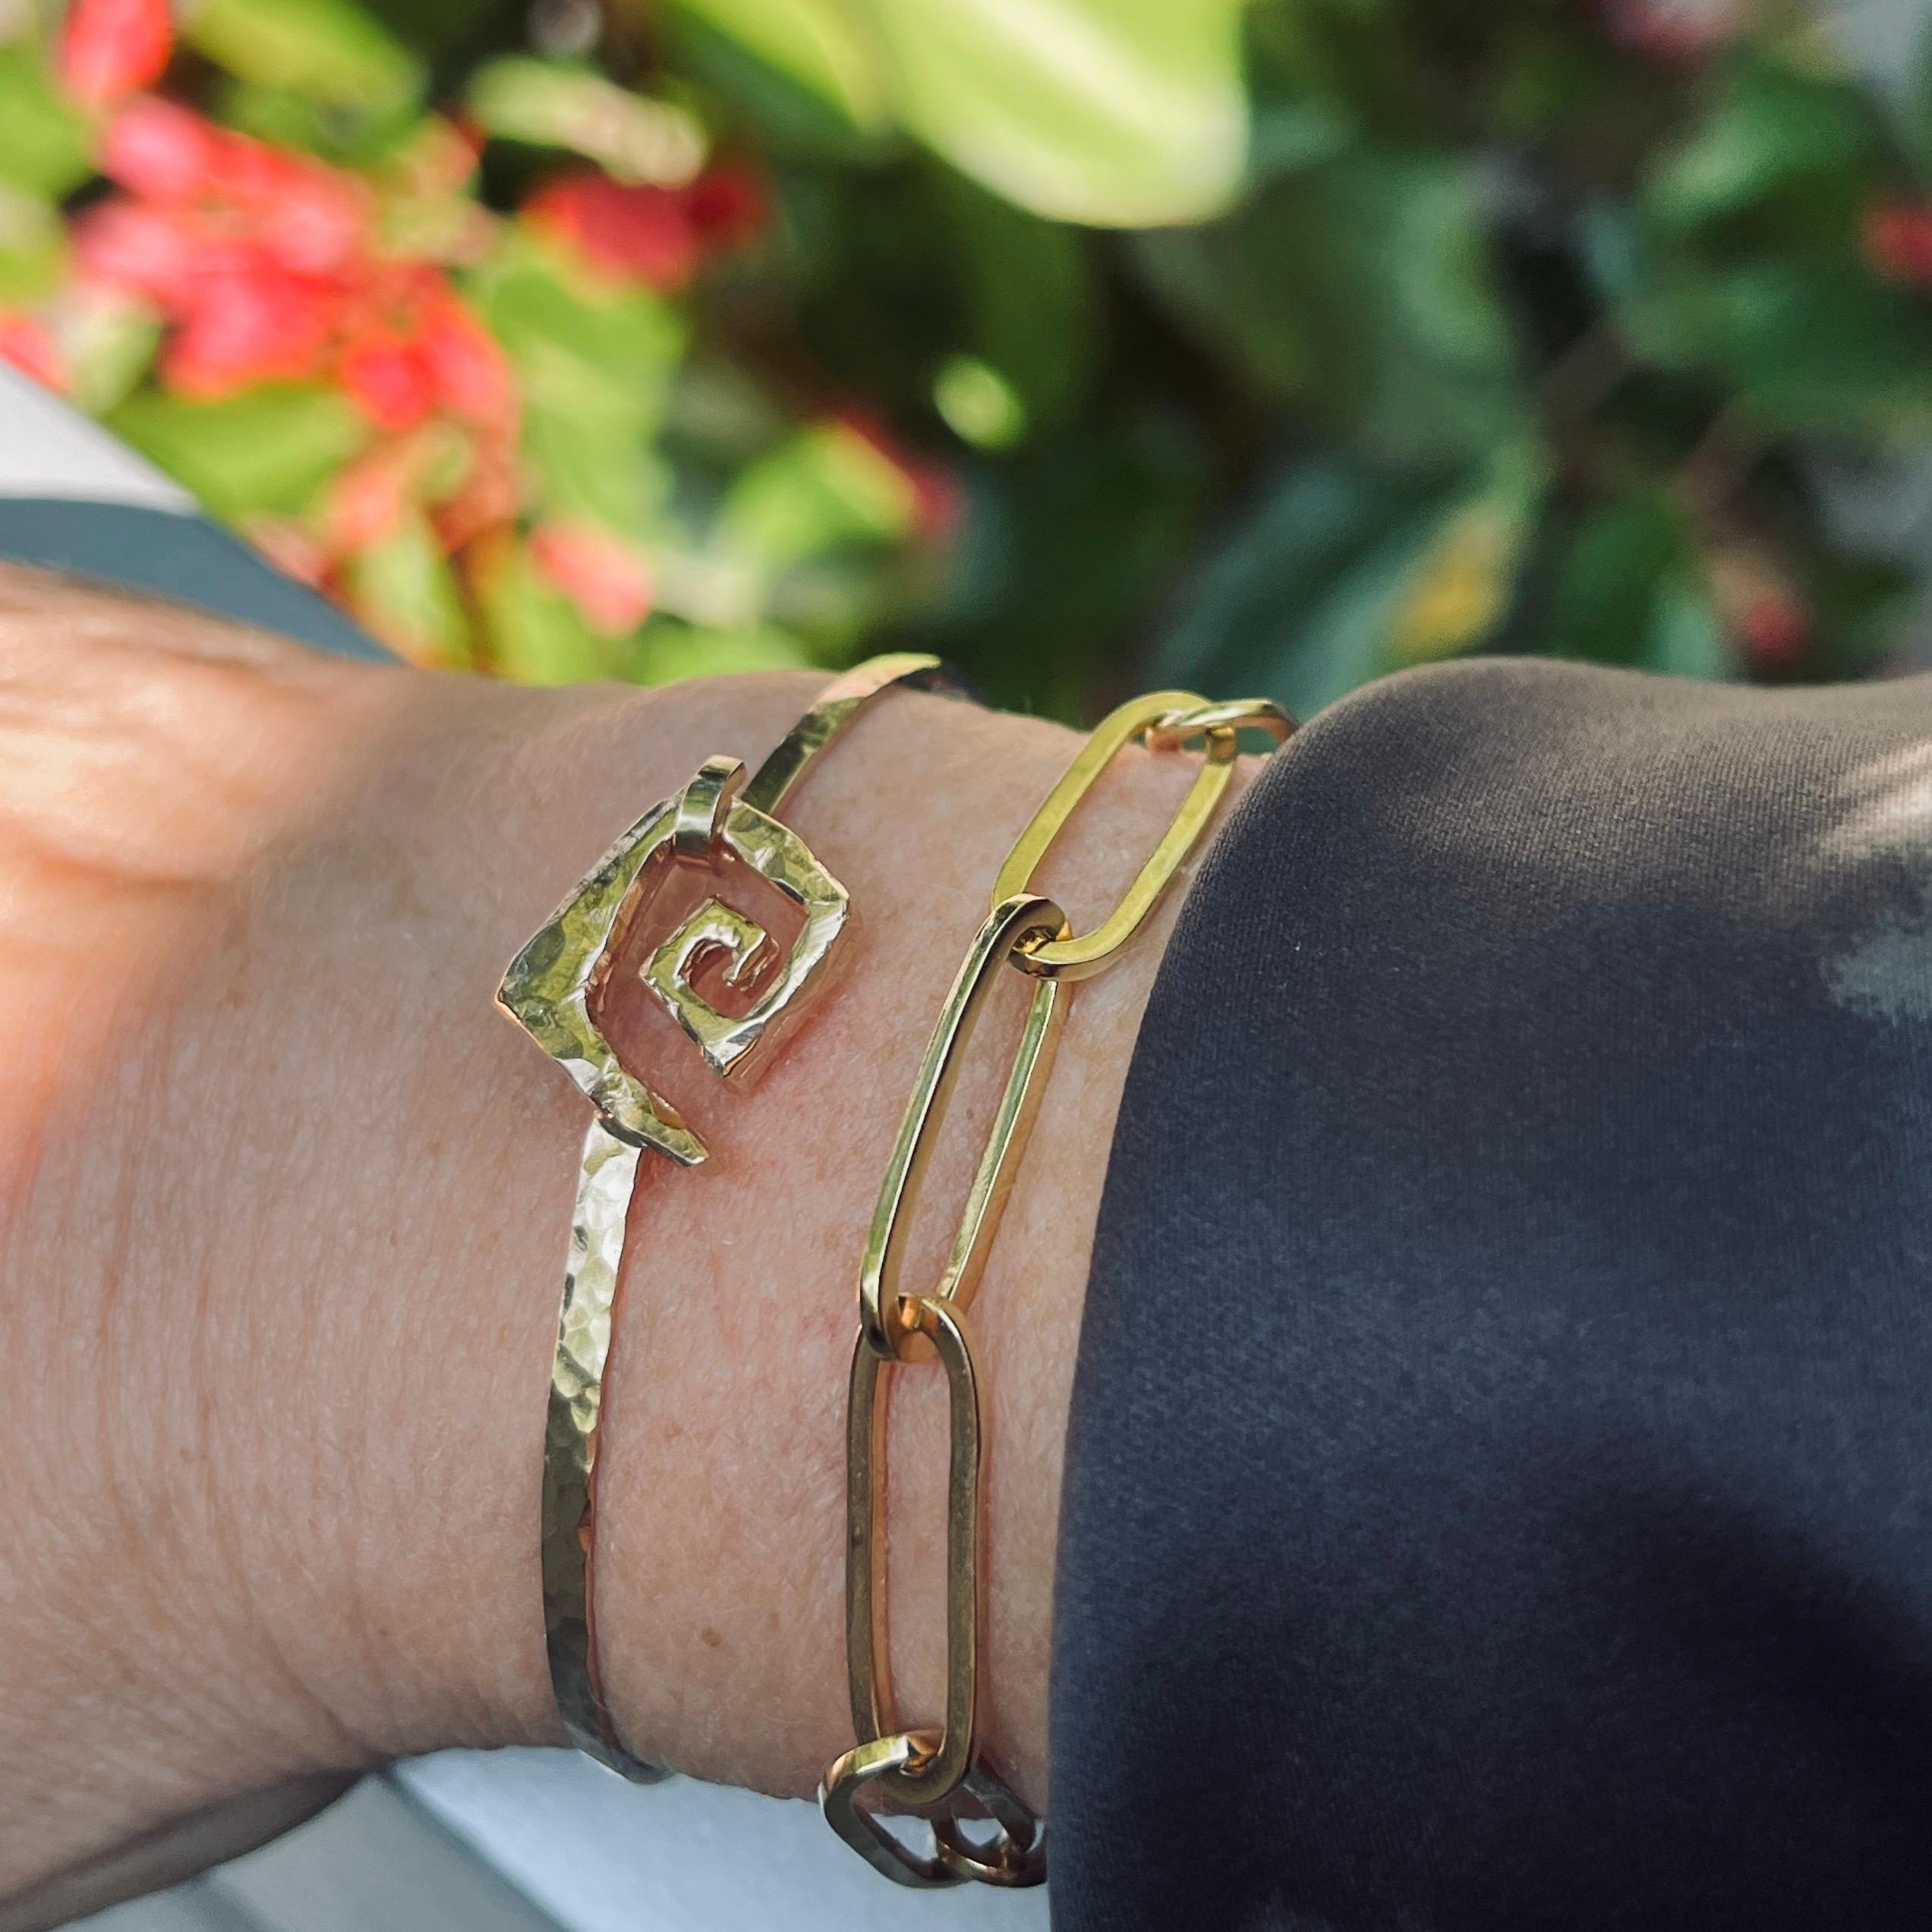 The Meander or Greek Fret symbolizes the bonds of friendship, of love and devotion. 

The History and Meaning Behind the Greek Key Pattern
For the people of Ancient Greece, Meander symbolized eternity and the undulating flow of human life through